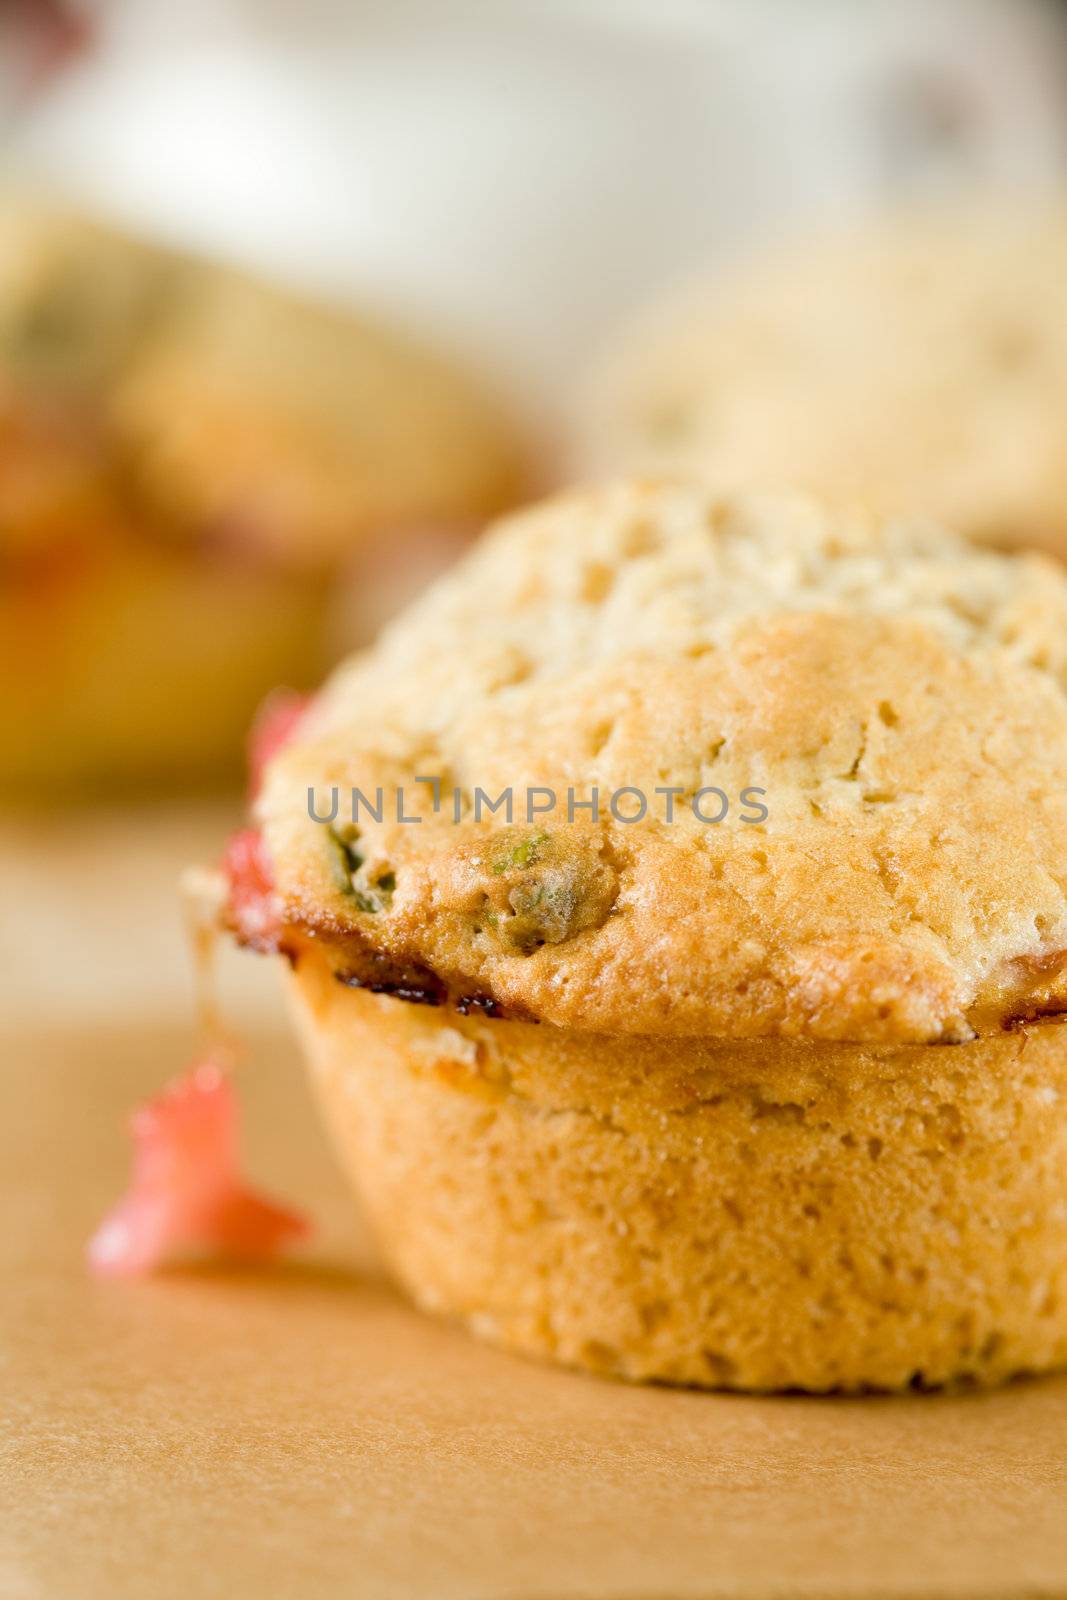 Delicious freshly baked muffins filled with pistachio nuts and rhubarb